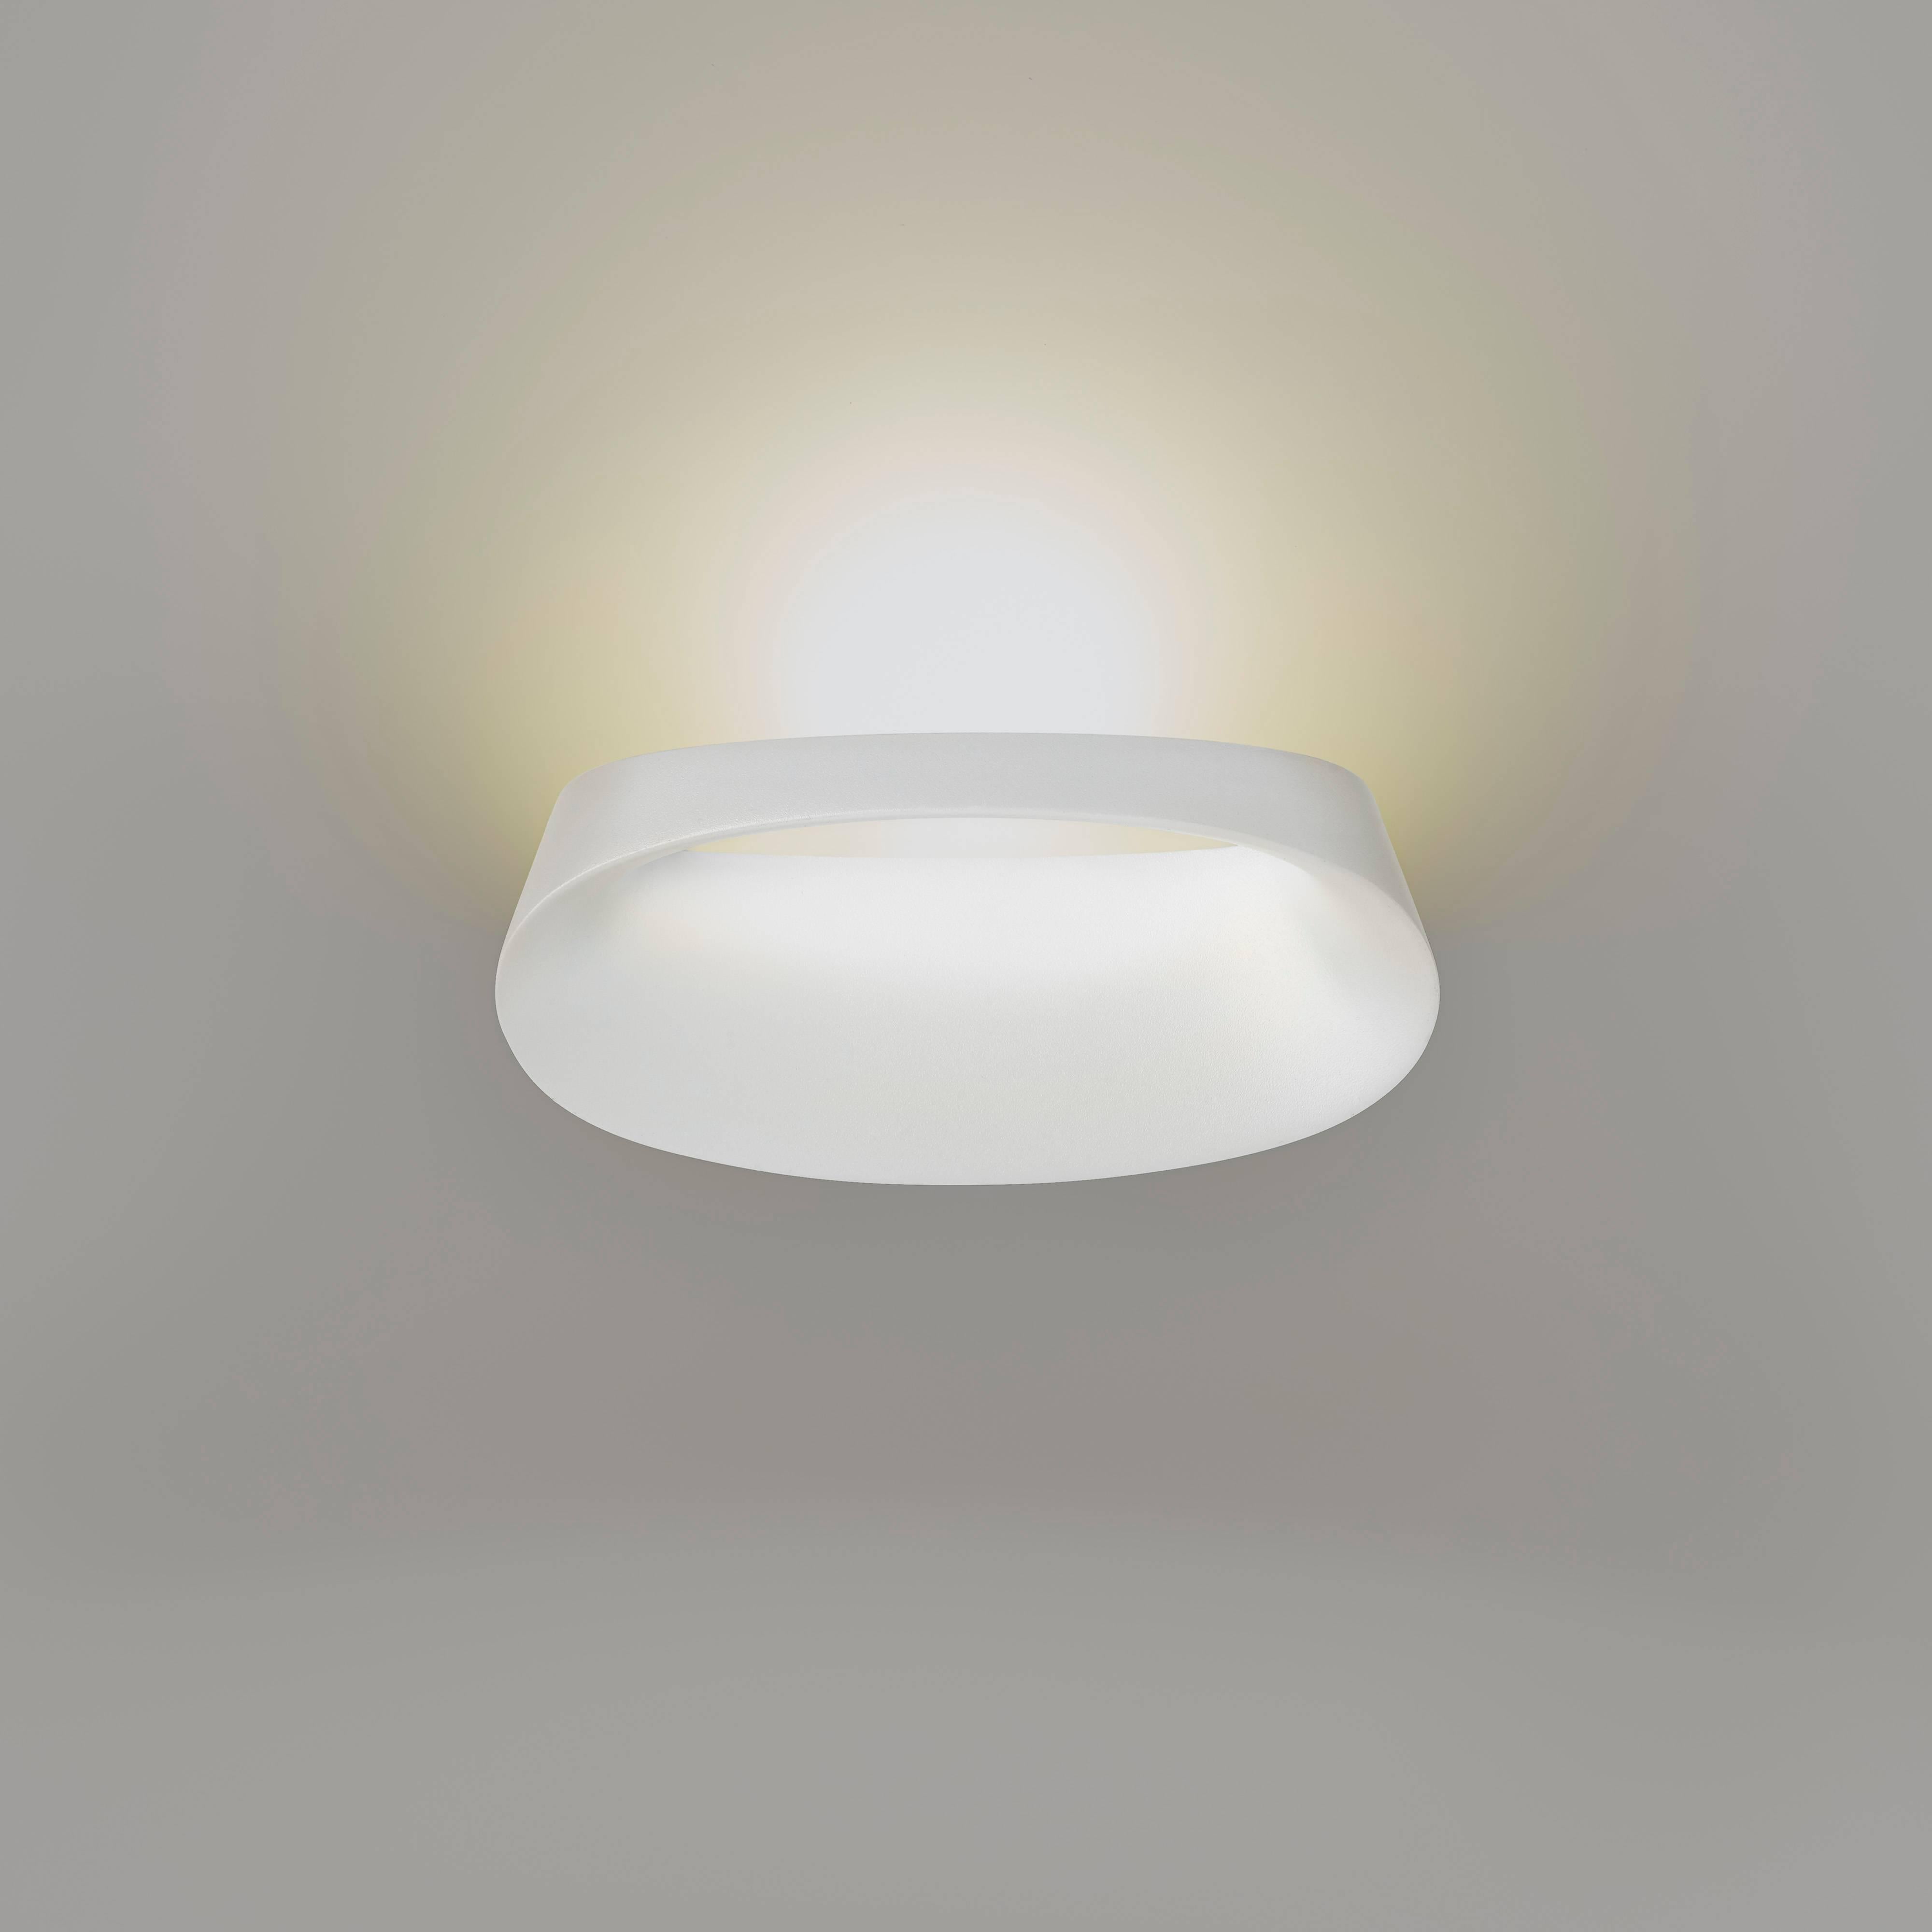 Manufactured in 2017 by Fontana Arte and designed by Odo Fioravanti in 2014, the Bonnet wall lamp in white die-cast aluminum reworks the concept of indirect lighting. The top part conceals a small yet very powerful Led source whose ray of light is